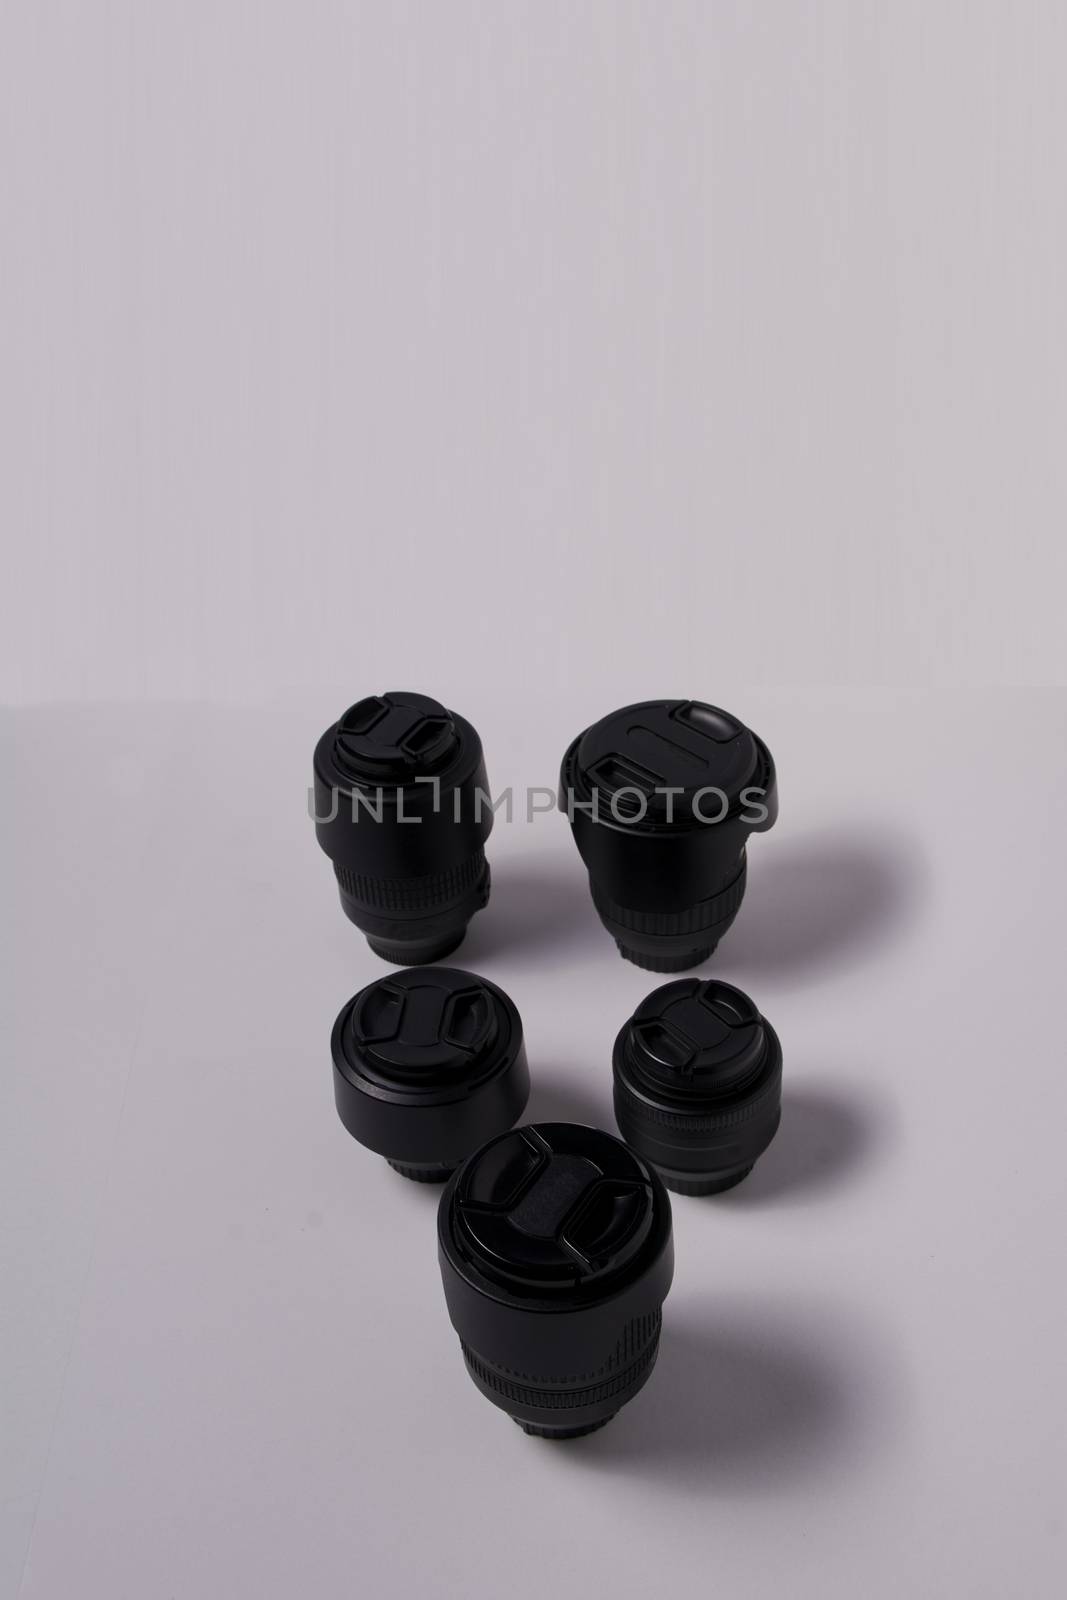 Photographic lens on white and clear background by raul_ruiz